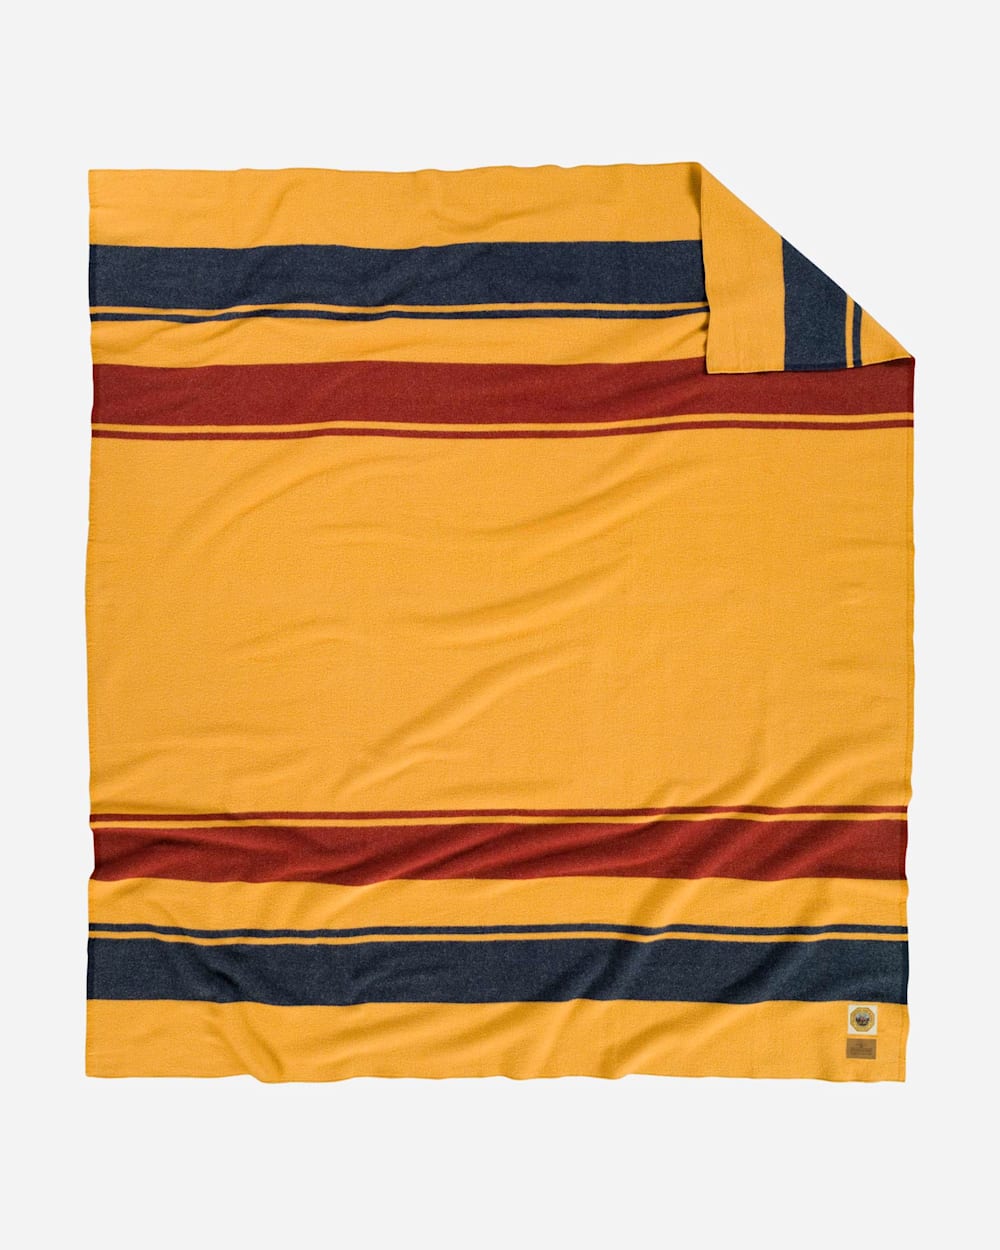 YELLOWSTONE NATIONAL PARK BLANKET IN YELLOWSTONE image number 1